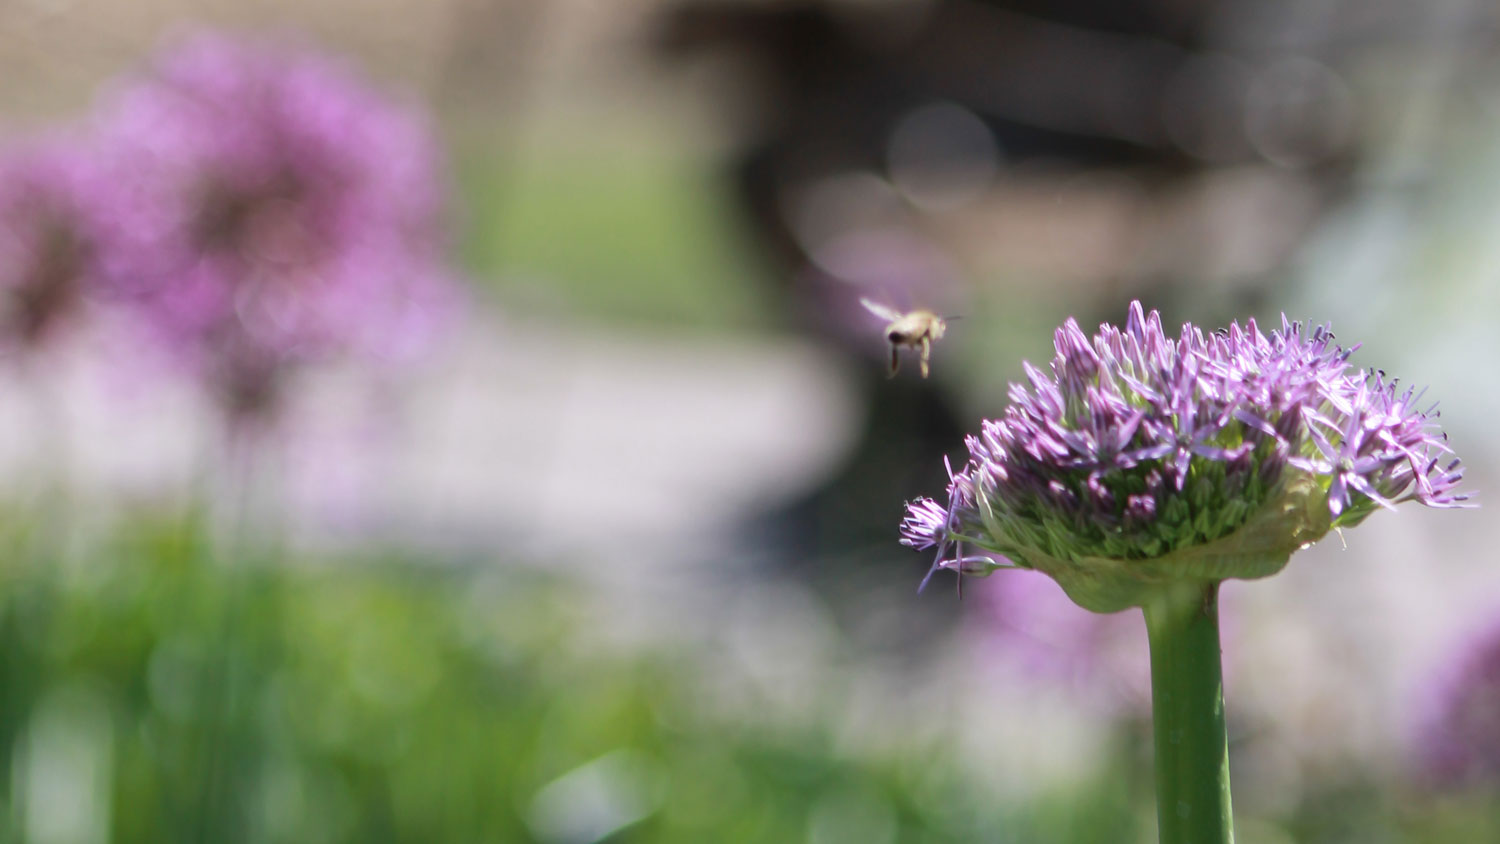 A pollinator appraoching a purple plant at Overland Park Arboretum and Botanical Garden